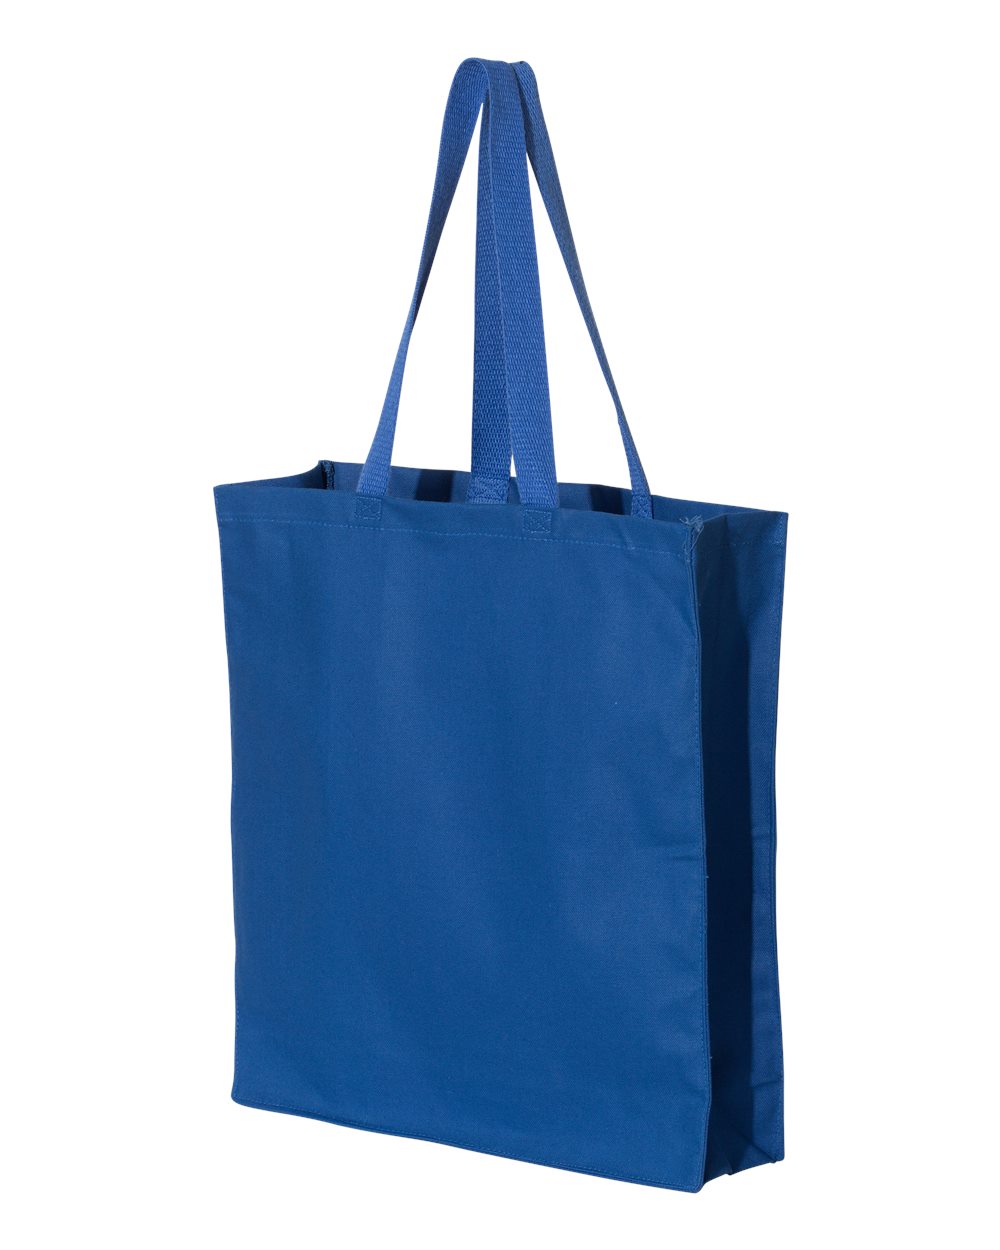 OAD OAD100 - Promotional Canvas Shopper Tote